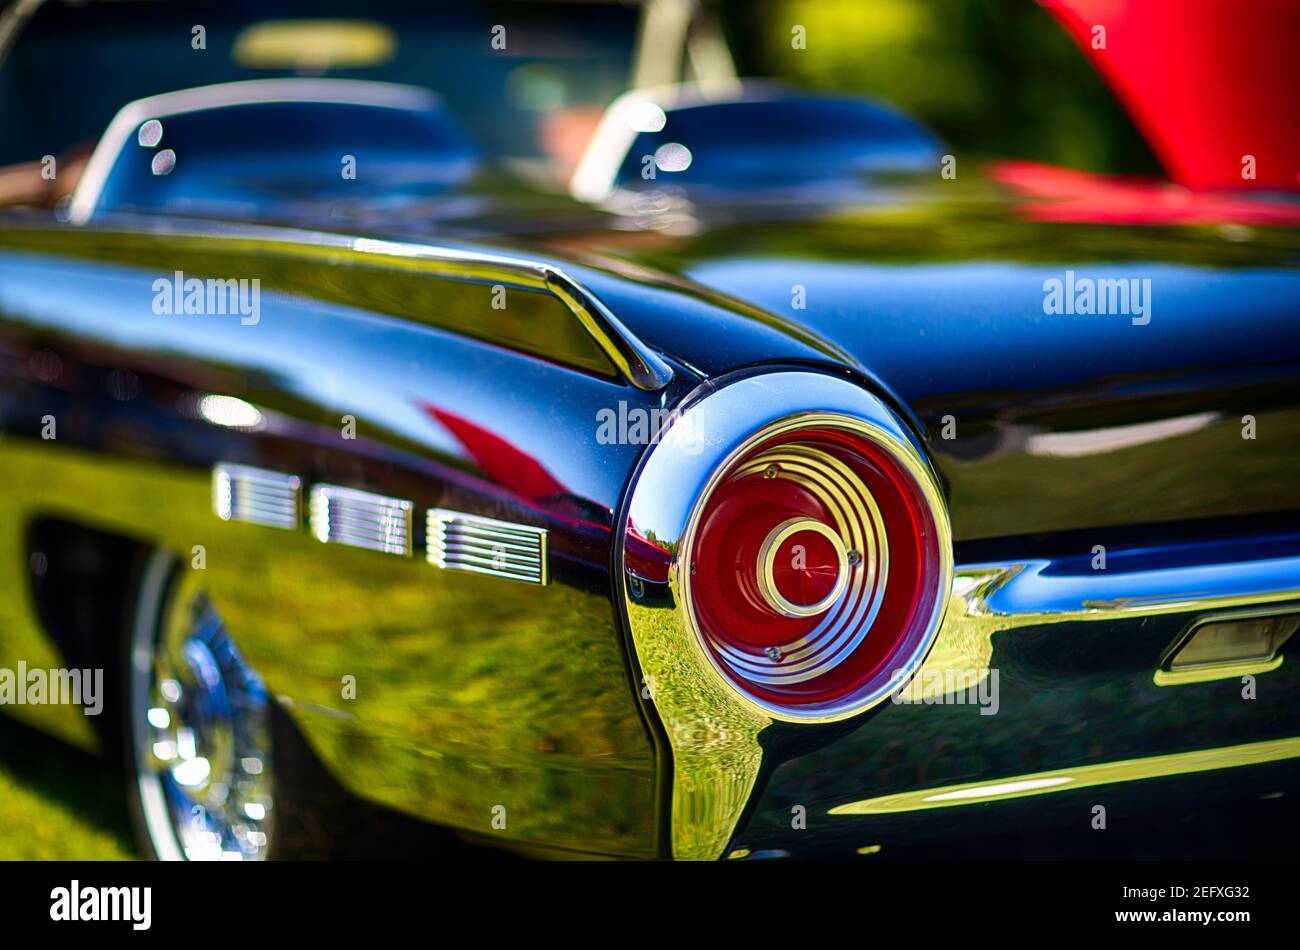 Tail Light Close Up View of a 1962 Ford Thunderbird Convertible Stock Photo